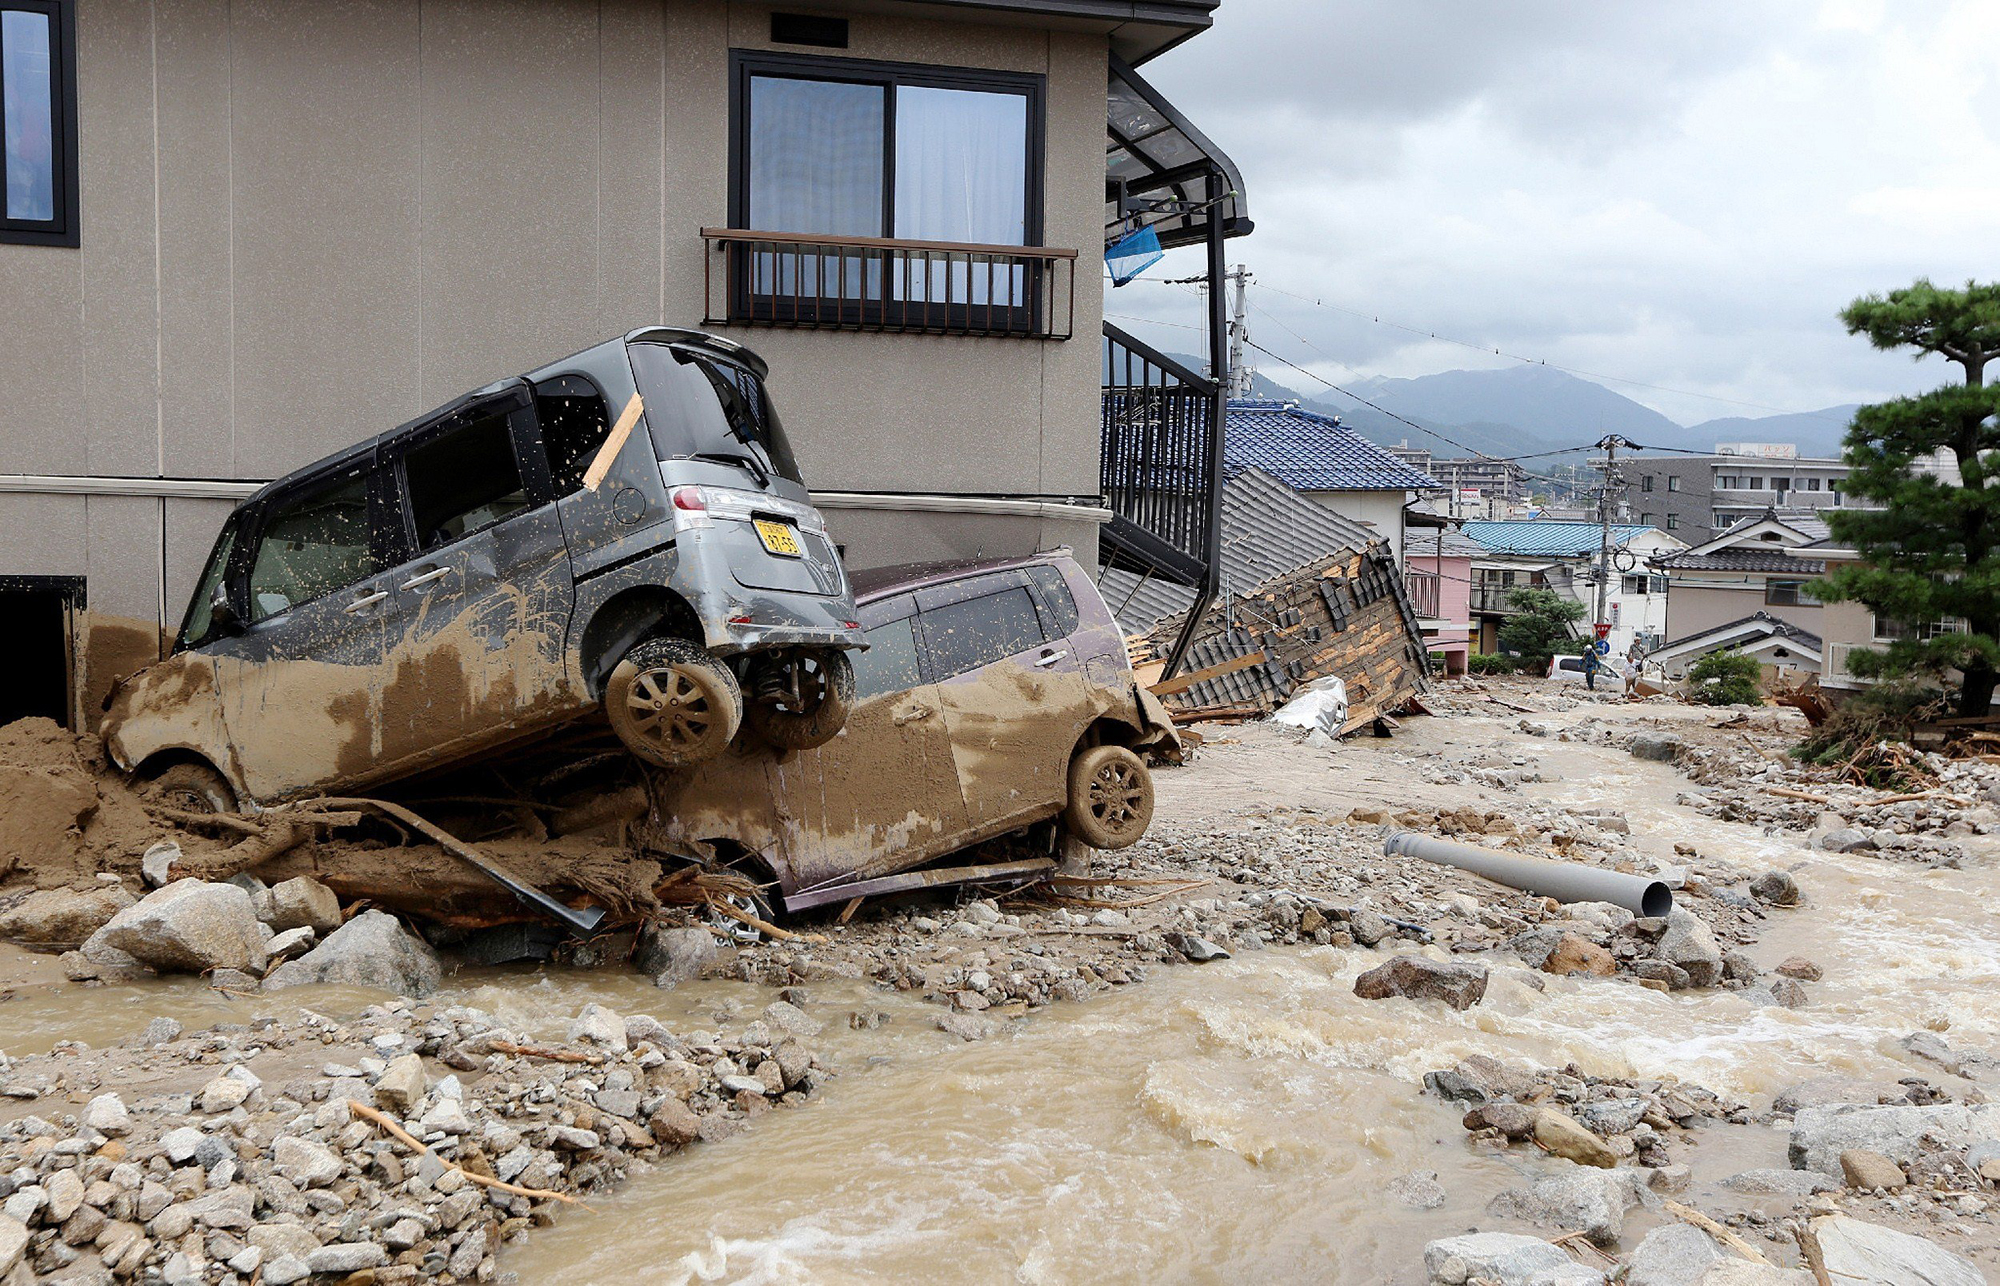 Cars damaged by a landslide lie in mud and debris after heavy rains hit the city of Hiroshima, western Japan, on Aug. 20, 2014.